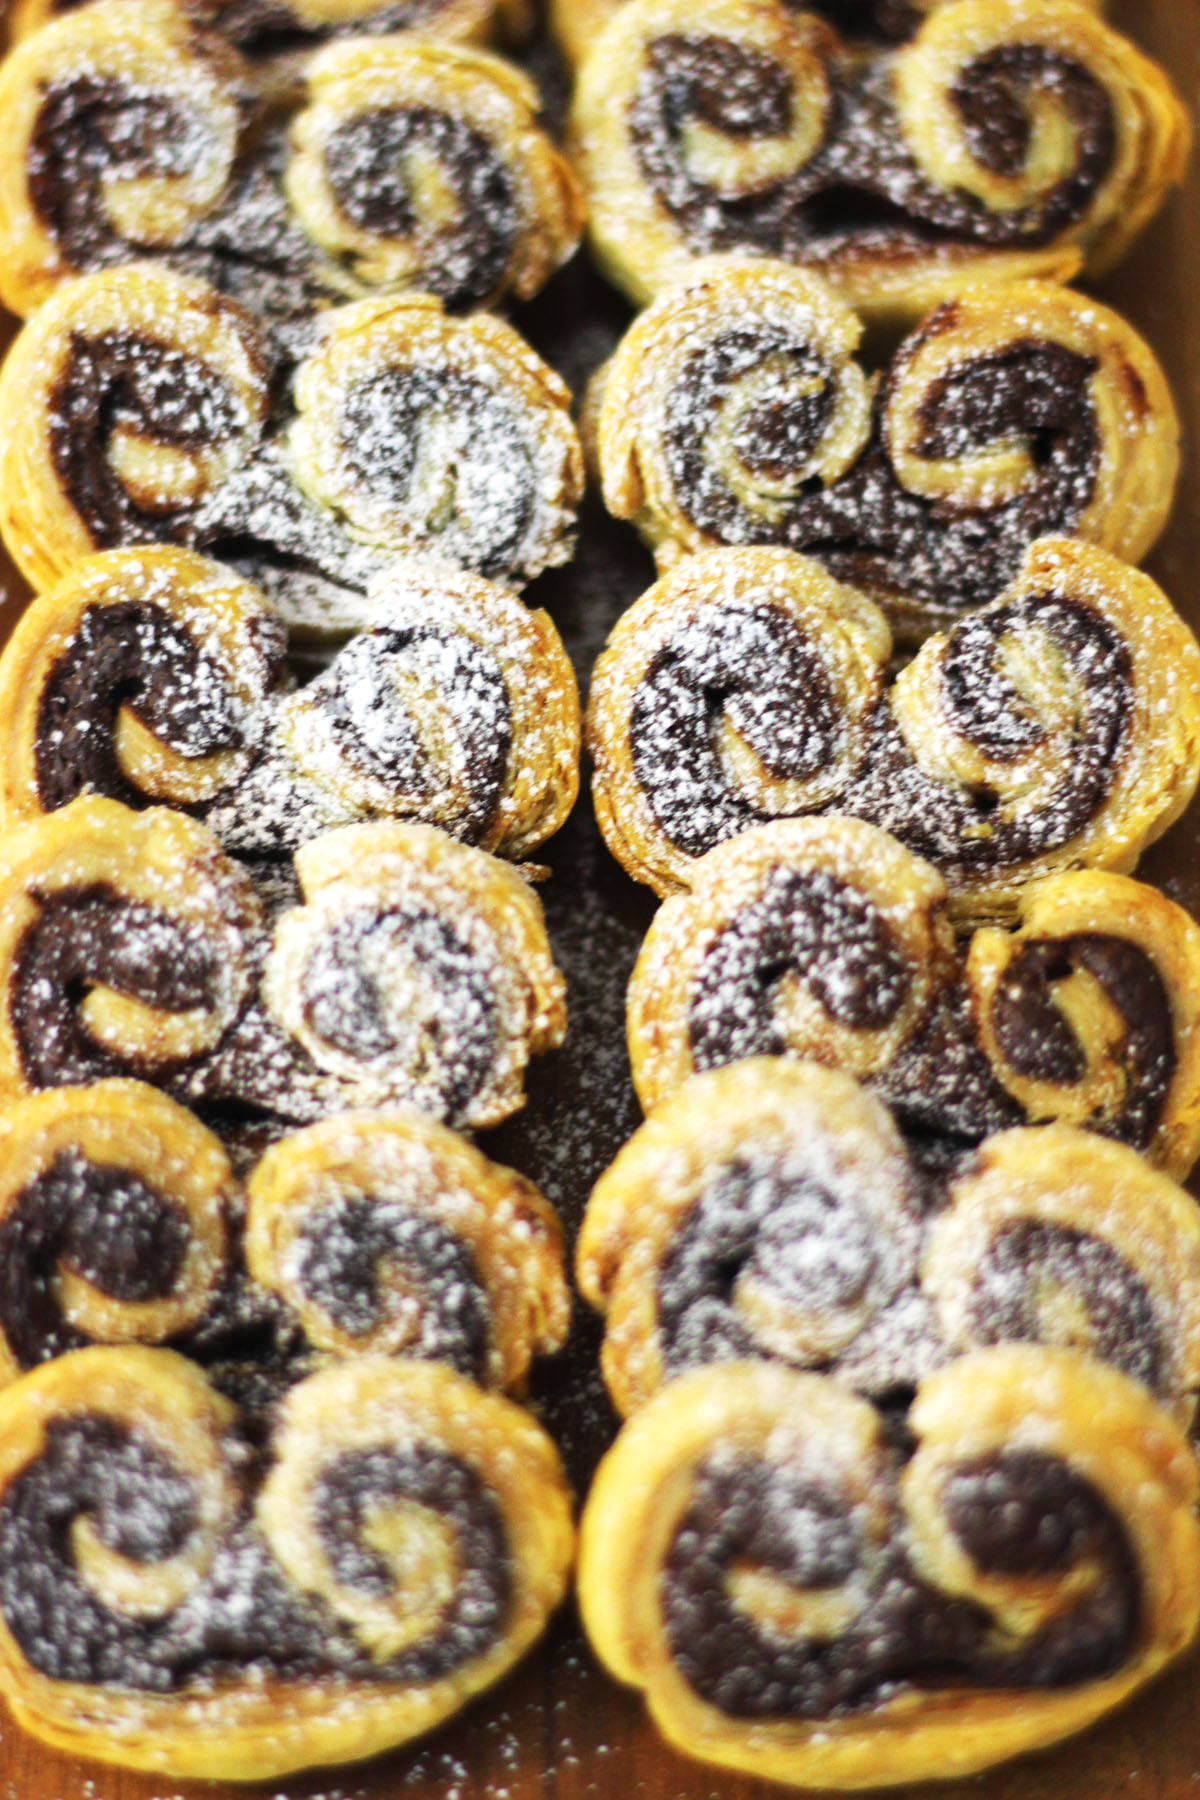 Find out the secret to making coffee shop style Nutella Palmiers in the comfort of your own home pour yourself a coffee and read the recipe at Supper in the Suburbs